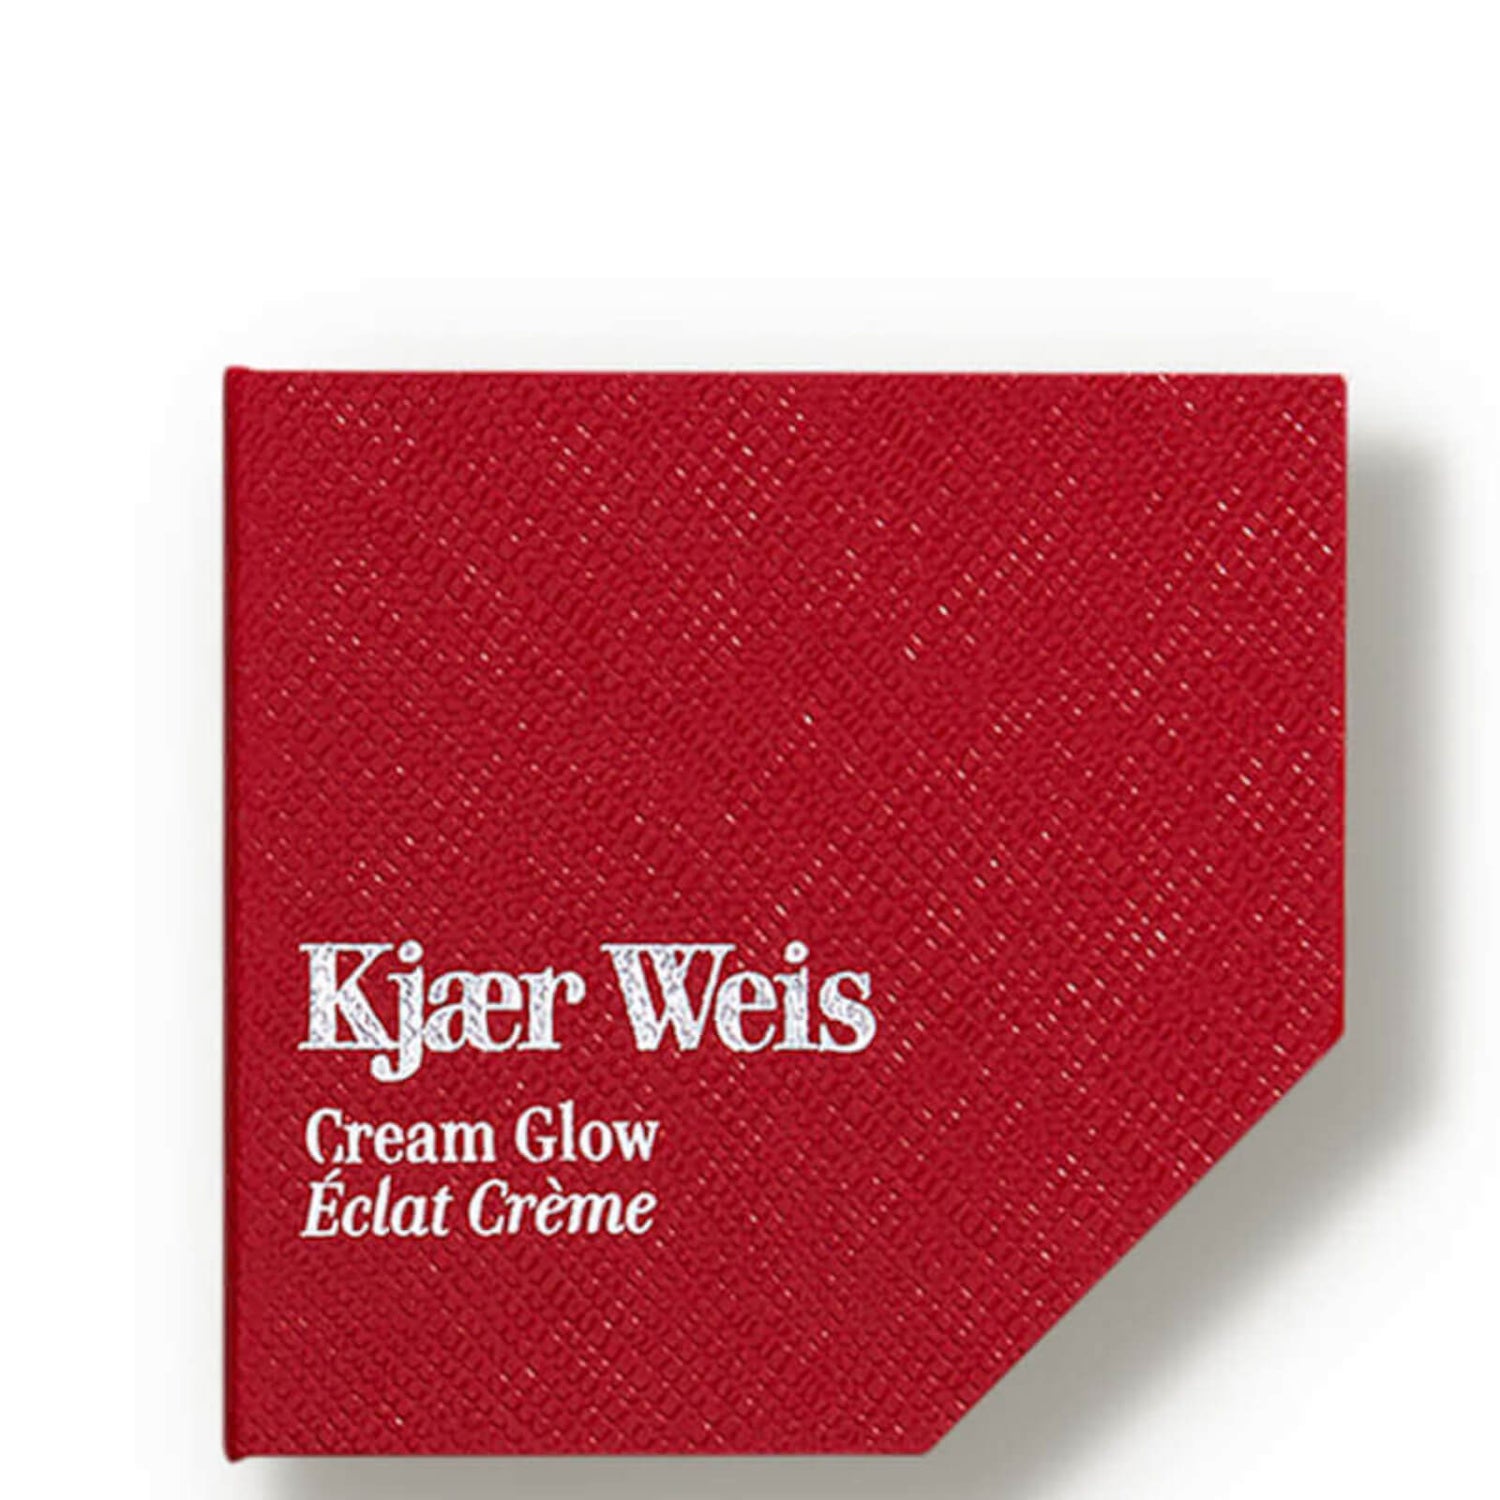 Kjaer Weis Red Edition Compact - Cream Glow (1 piece)